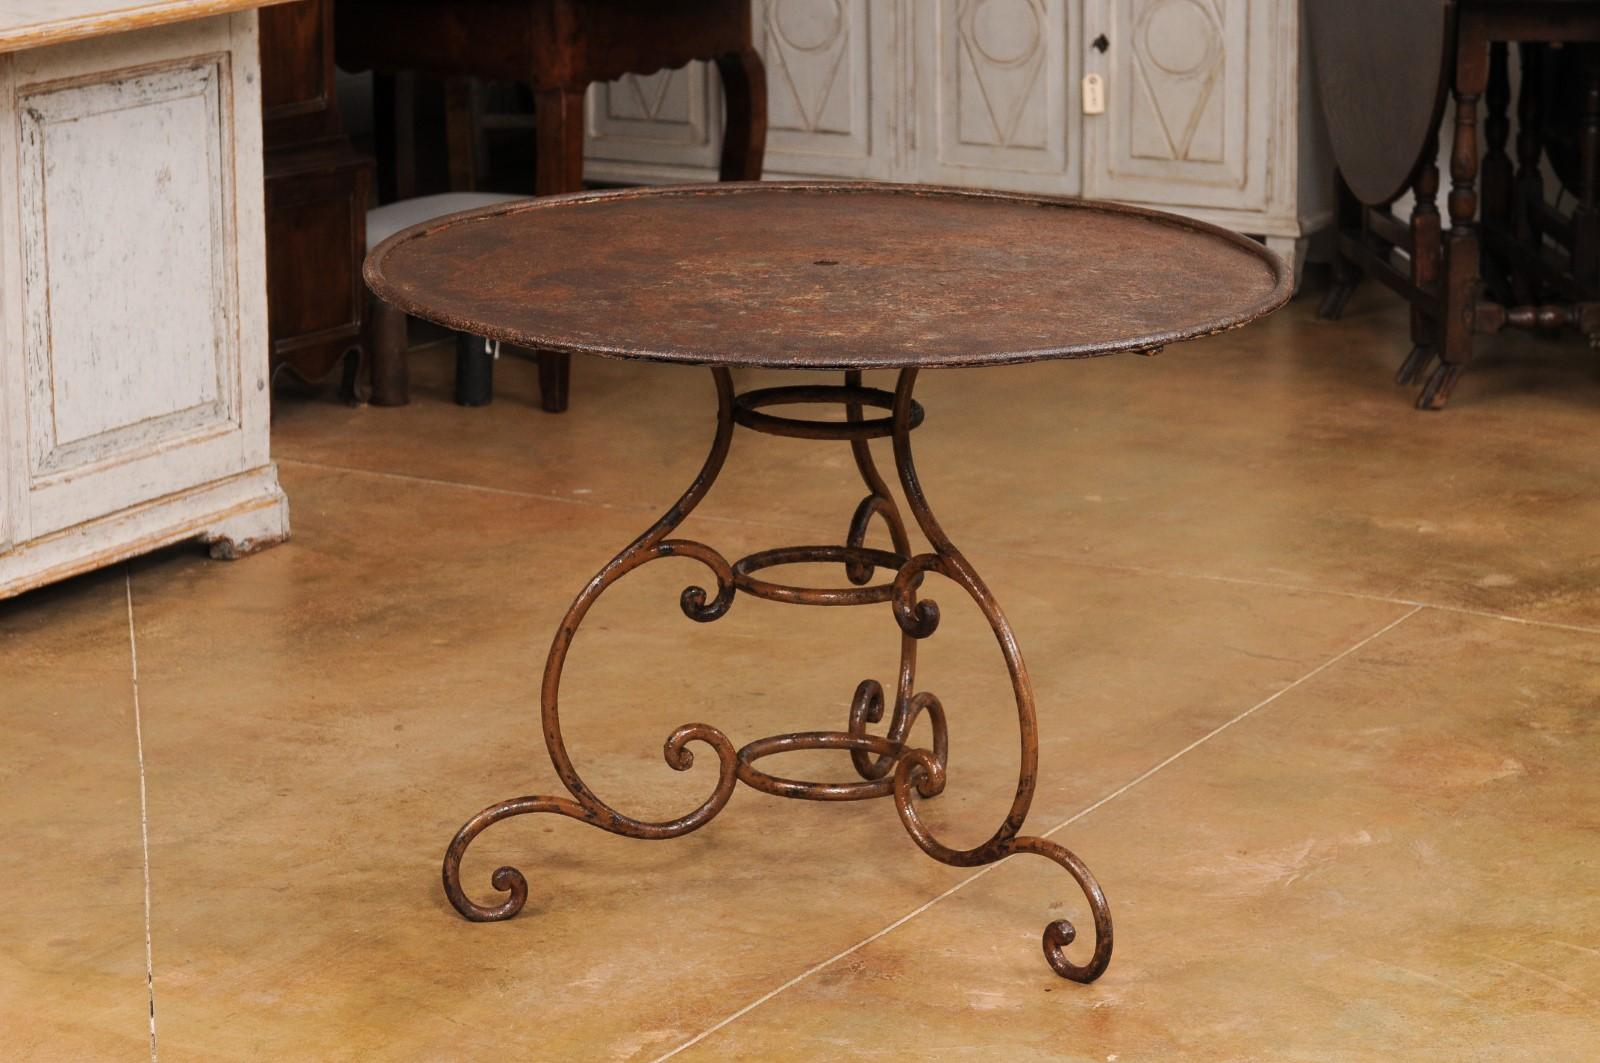 French 19th Century Round Iron Garden Table with Scrolling Base and Rusty Finish In Good Condition For Sale In Atlanta, GA